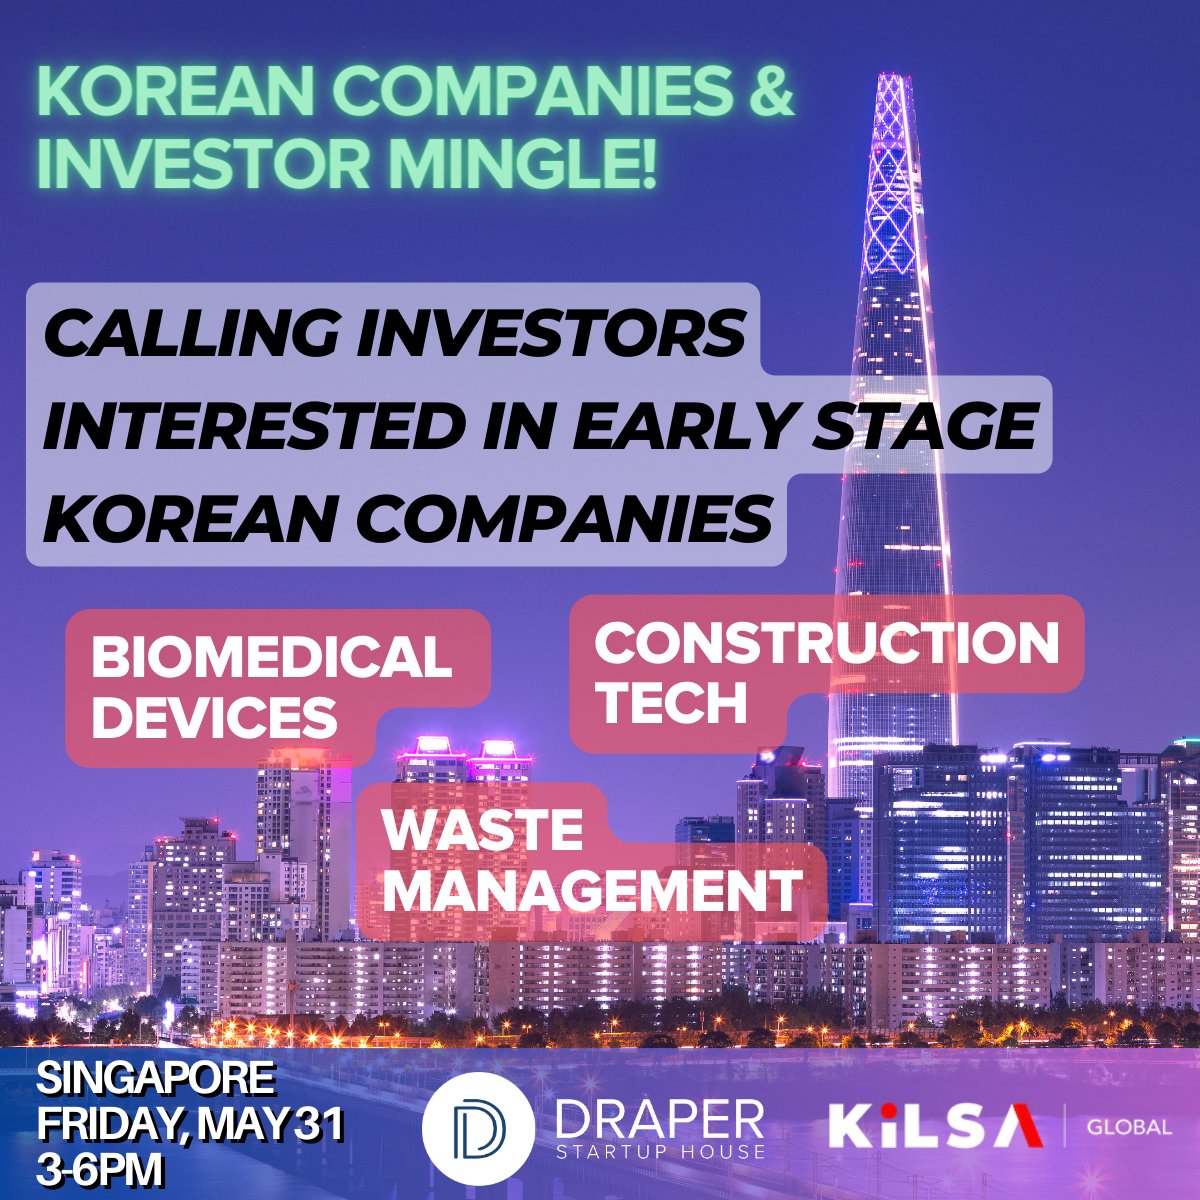 🇸🇬 Singapore: ​Inviting #investors interested in early stage #Korean companies who are innovating in the biomedical devices, construction tech, and commercial waste management industries. RSVP here 👉 lu.ma/rog0bvsv